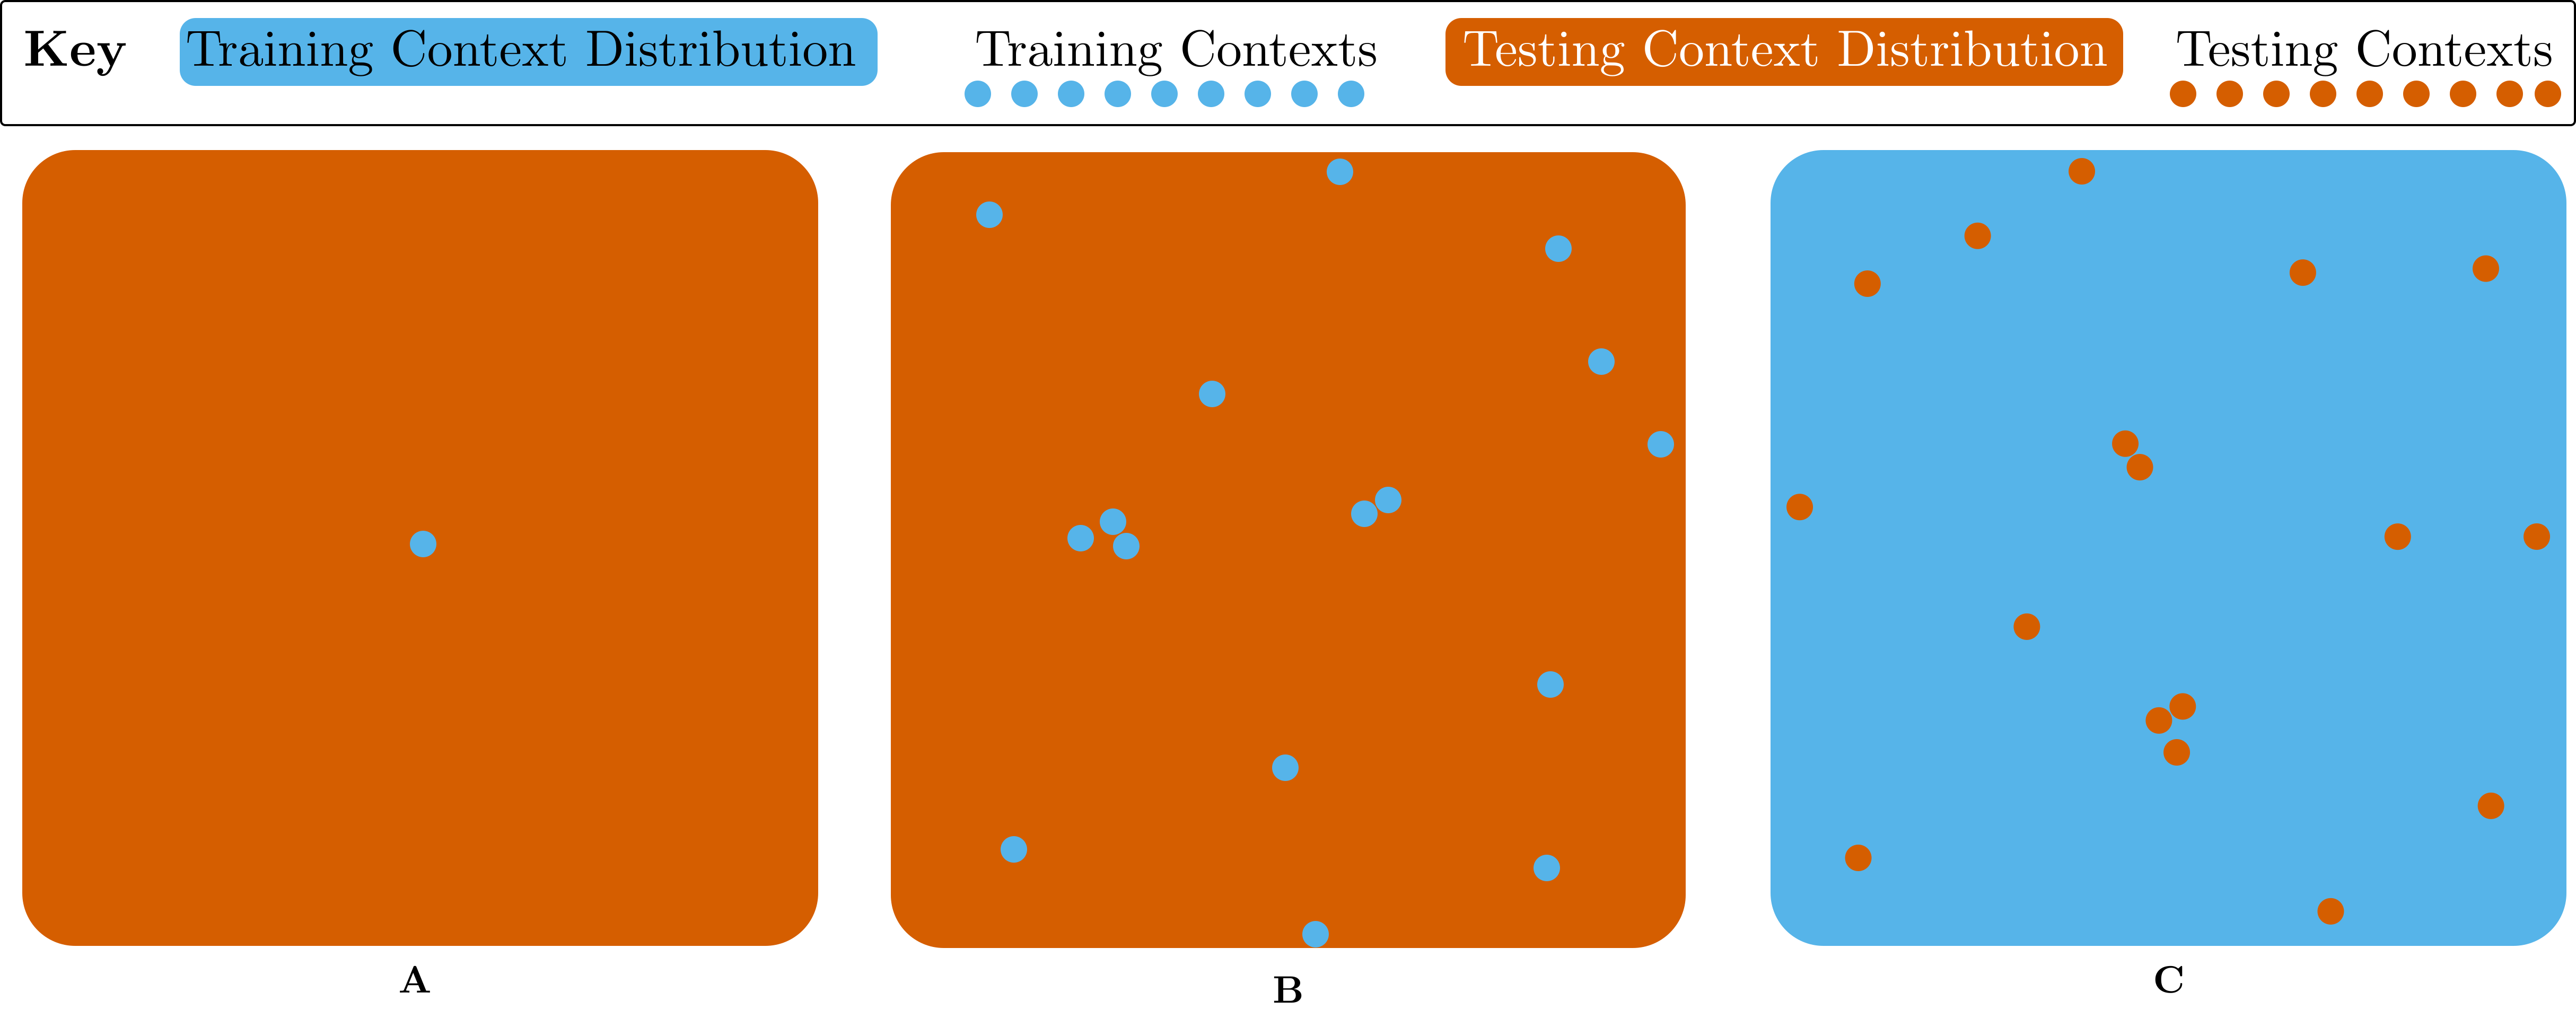 Figure 3: Visualisation of Evaluation Protocols for PCG Environments. **A** uses a single training context, and the entire set for testing. **B** uses a small collection of random training contexts, and the entire set for testing. **C** reverses this, using the entire set for training apart from random held out contexts that are used for testing.